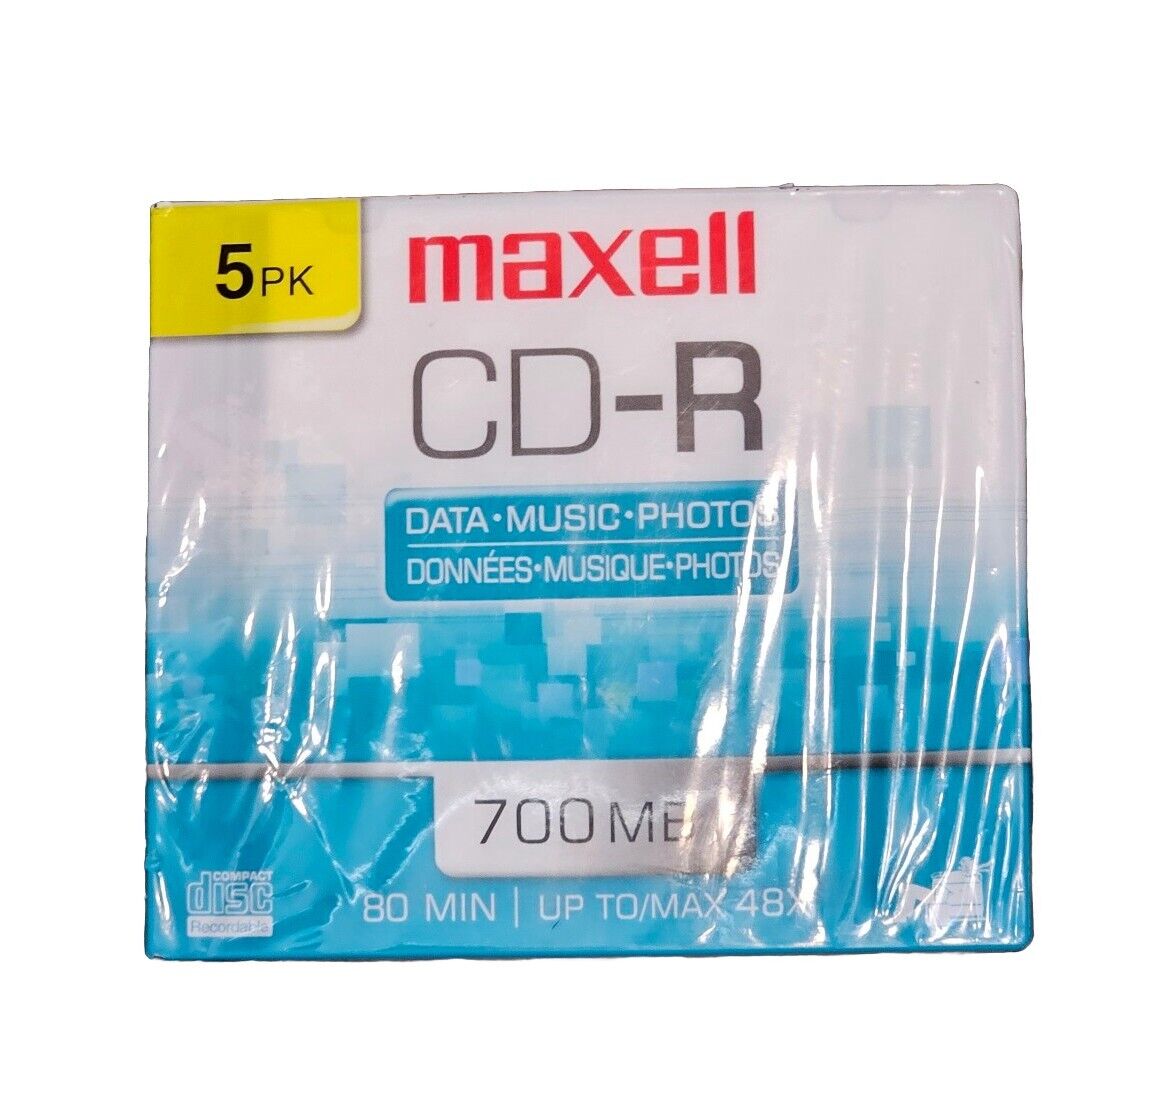 Maxell CD-R 5 Pack 700 MB  Data Music Photos 80 Min Up To/Max 48X New Sealed